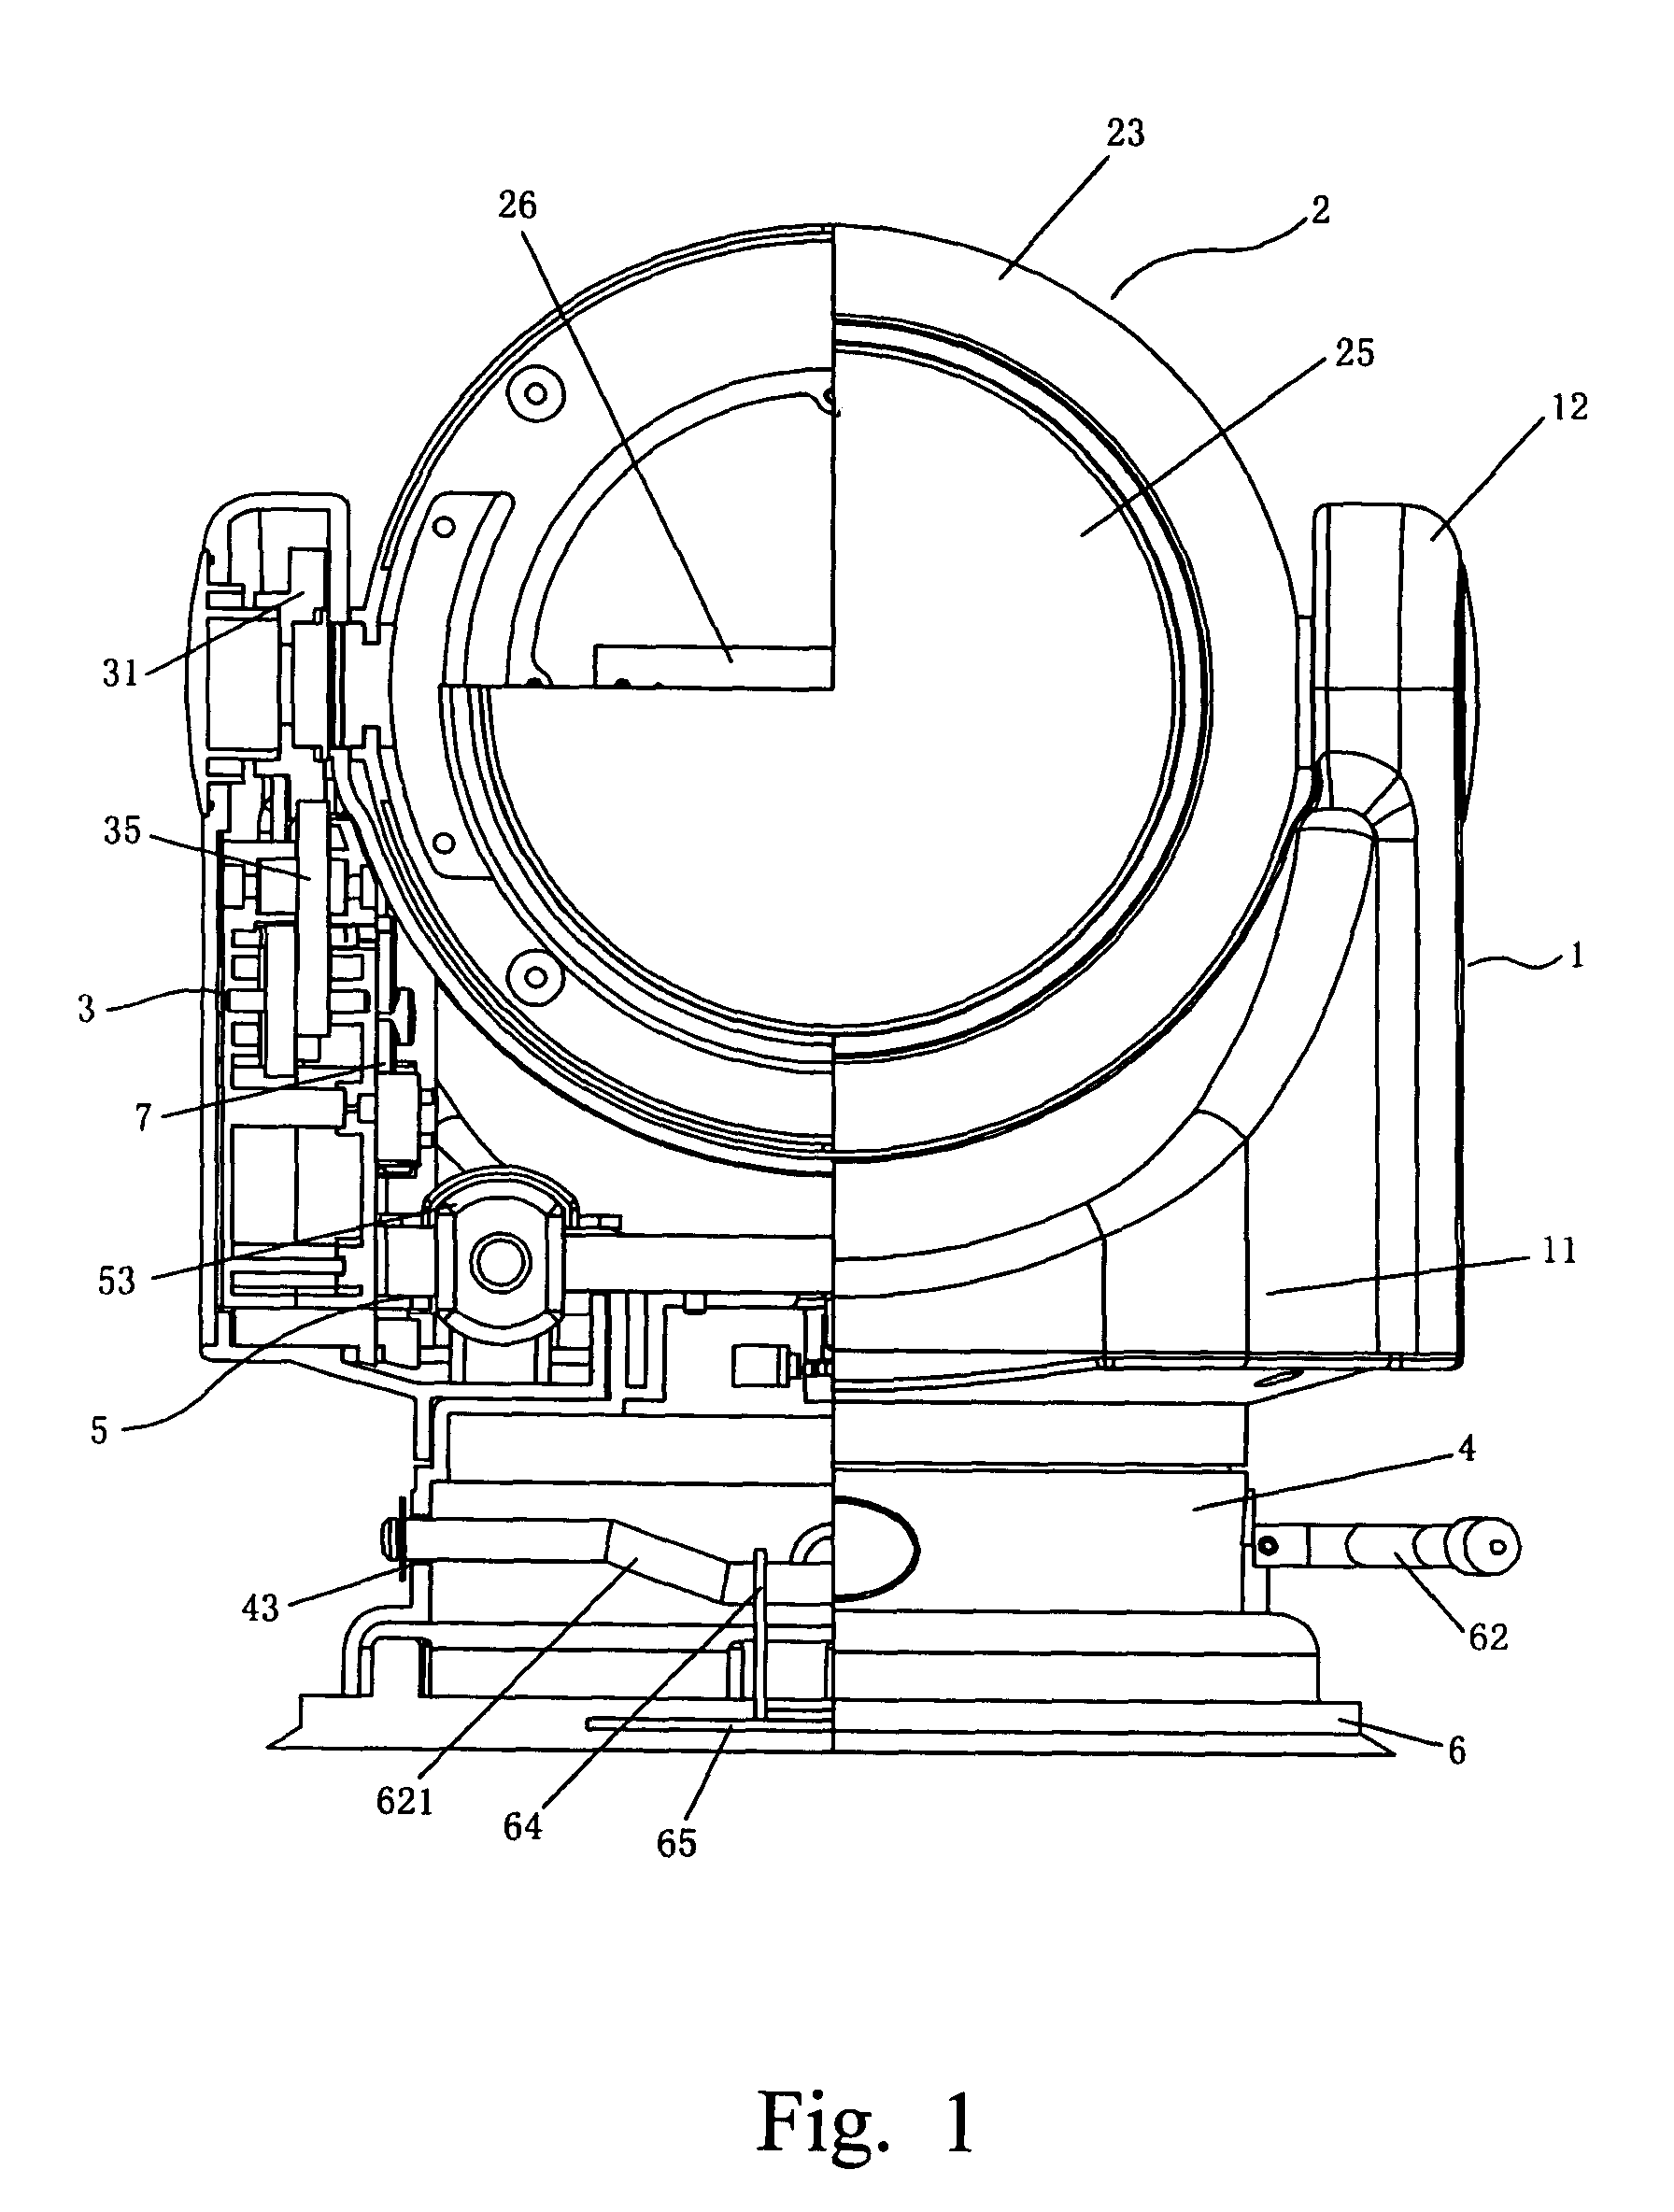 Remote control assembly comprising a signal light and a spotlight